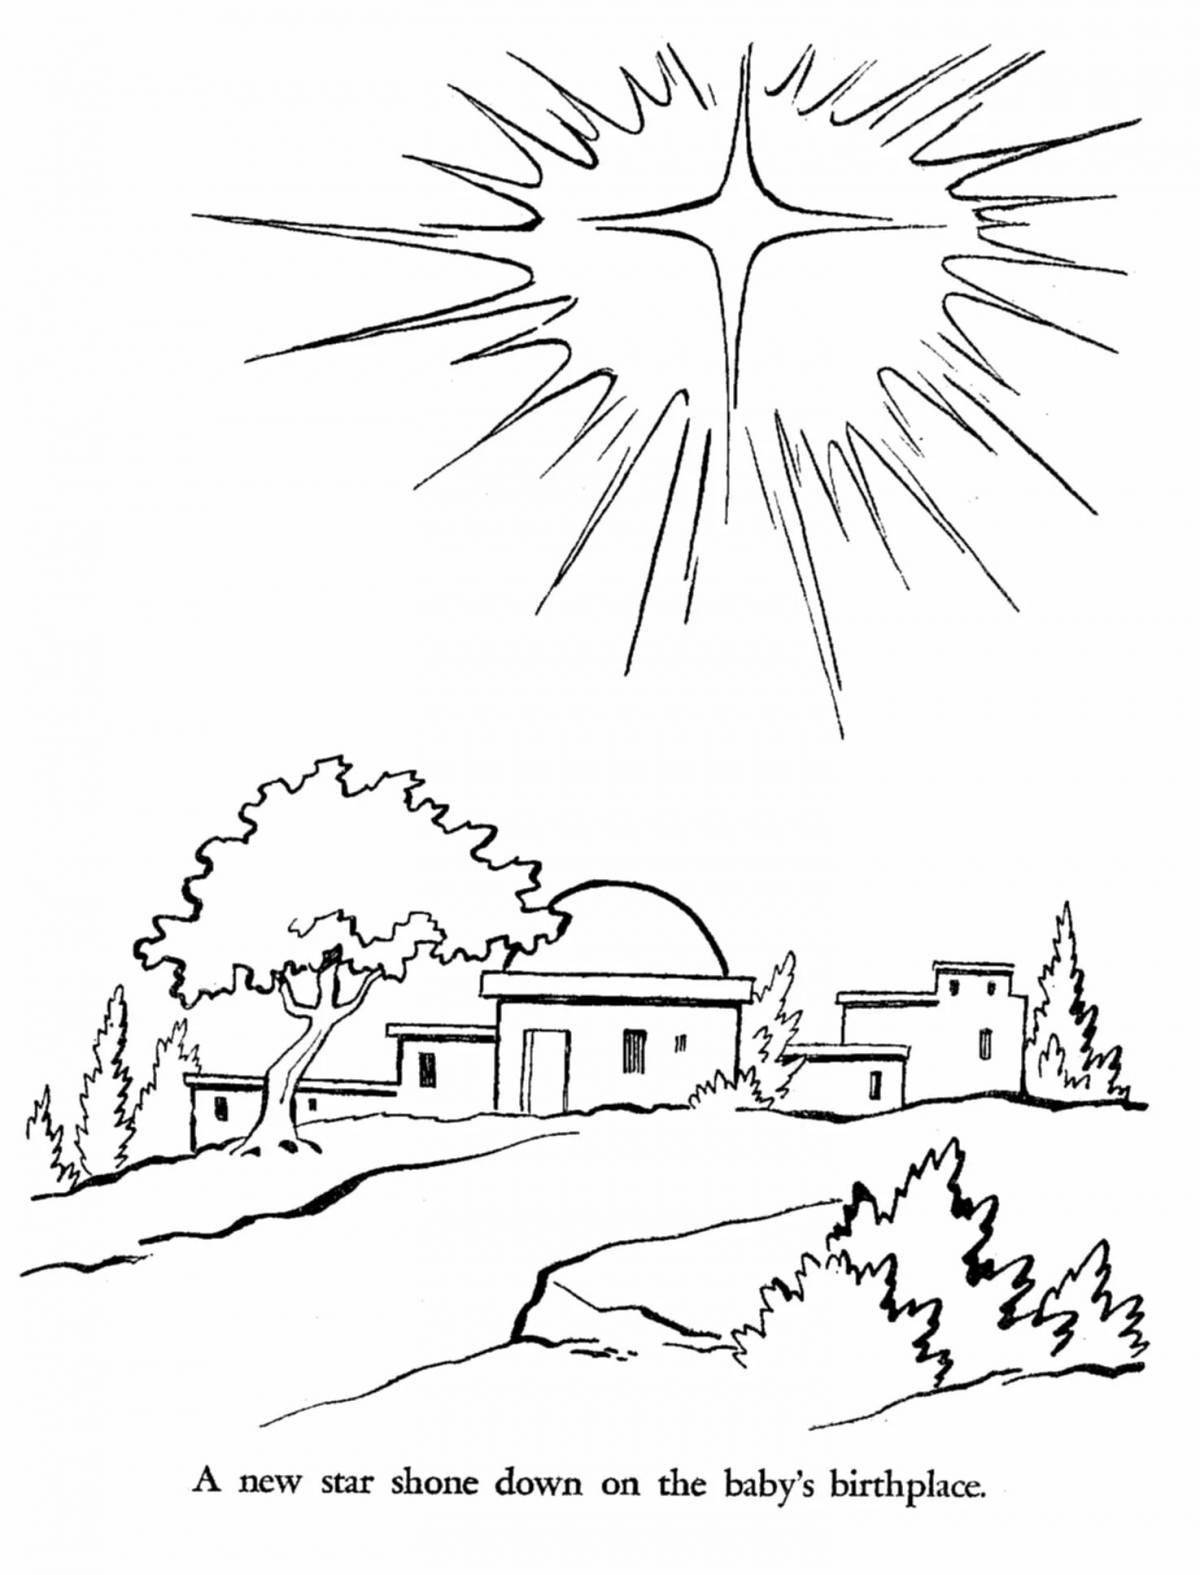 Glamorous star of bethlehem coloring pages for kids